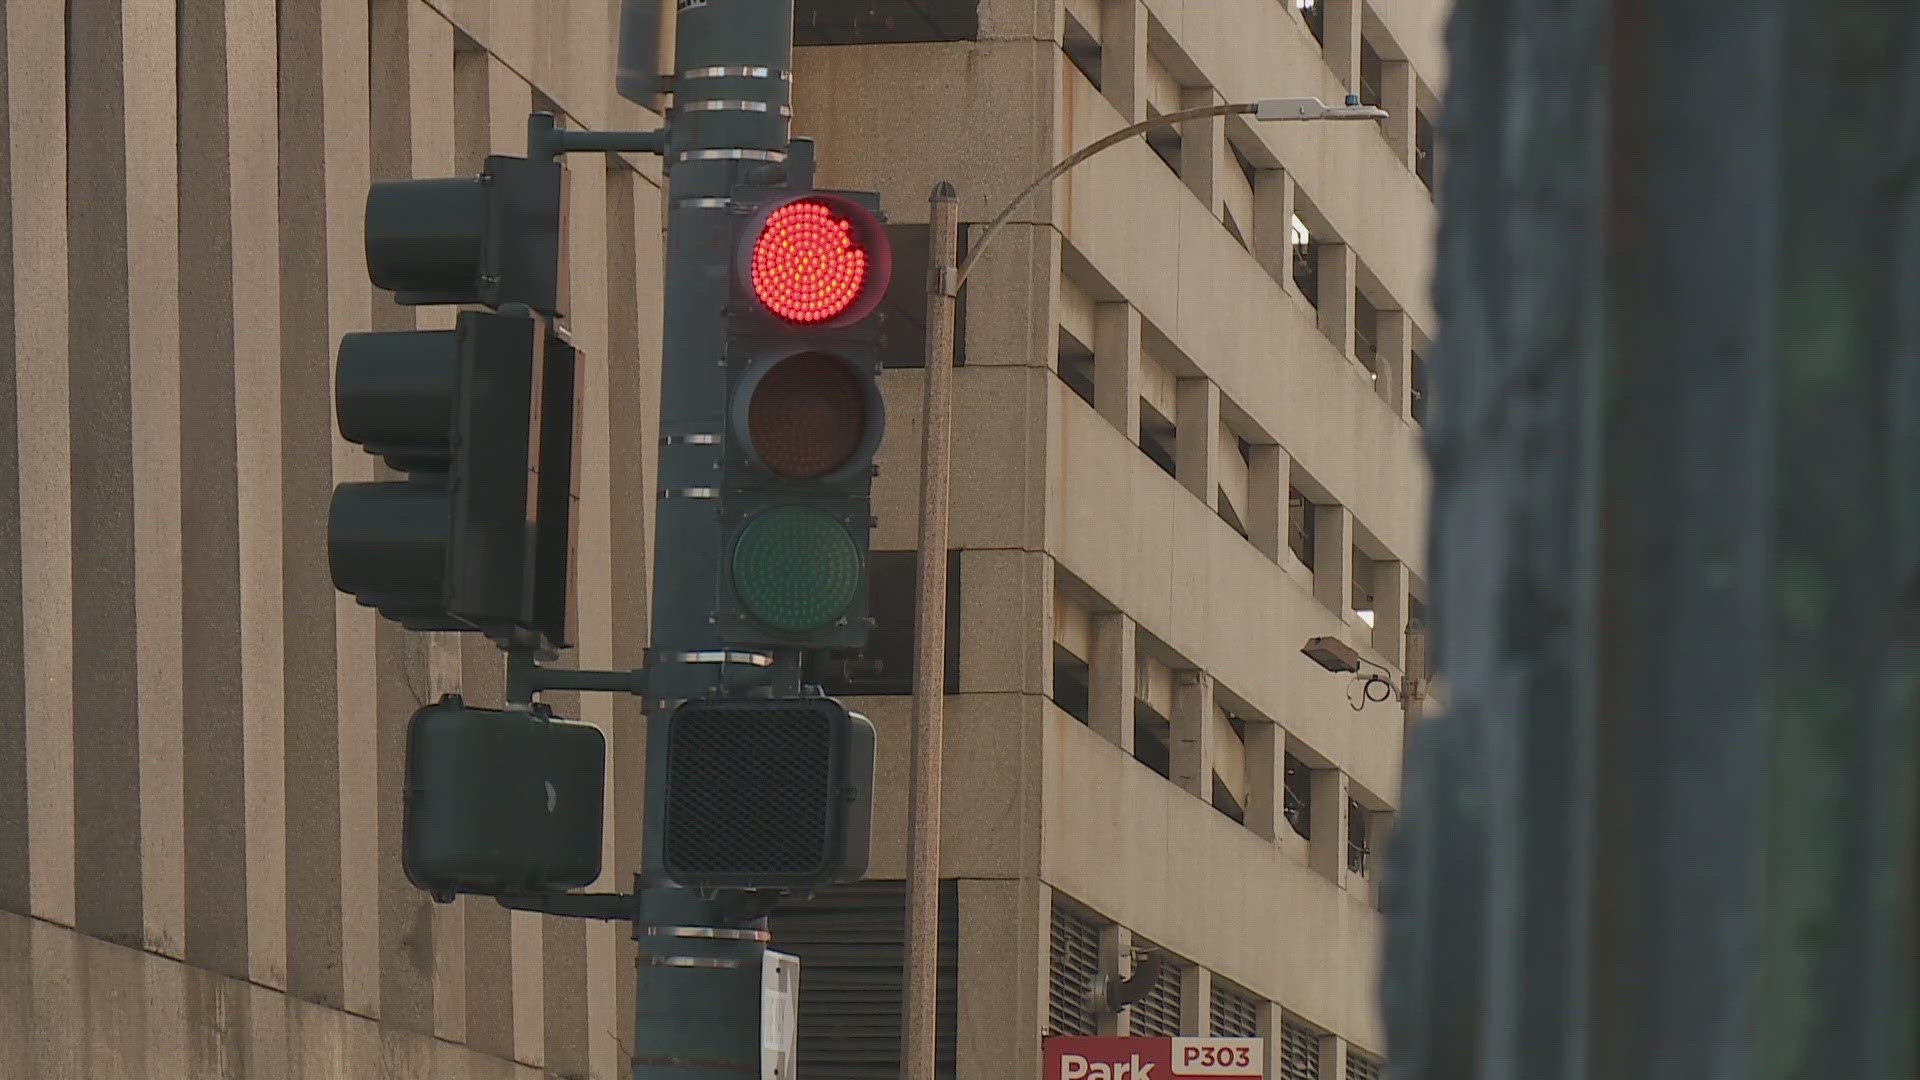 Most traffic lights in the city are managed by the Department of Public Works. Some are overseen by the Department of Transportation.